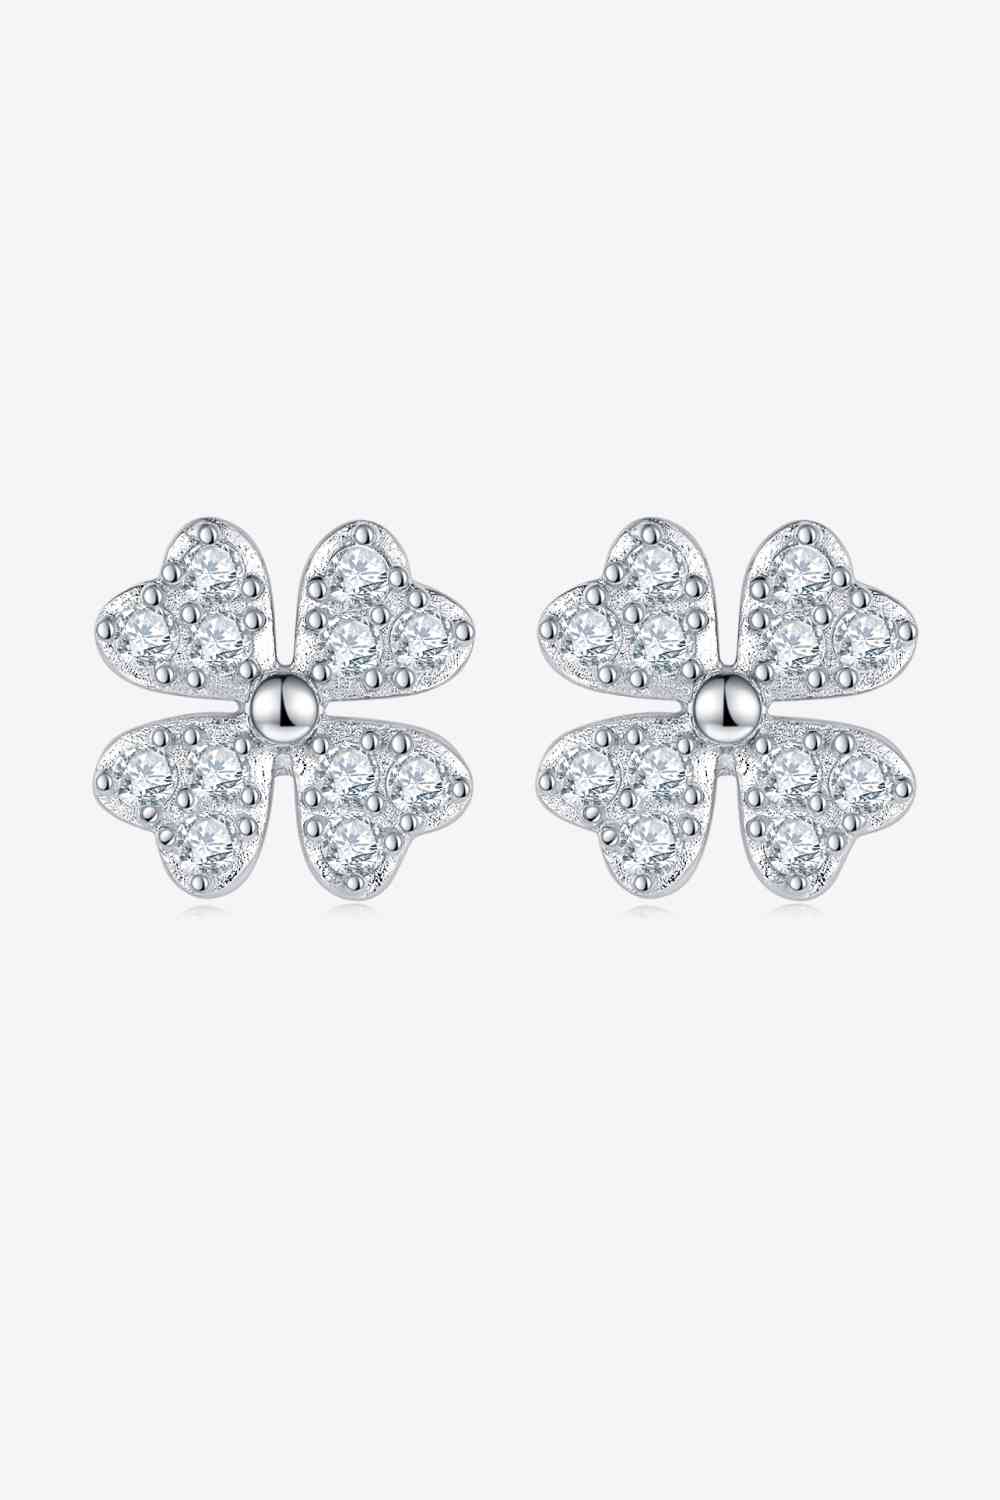 Adored Moissanite Four Leaf Clover Stud Earrings Silver One Size